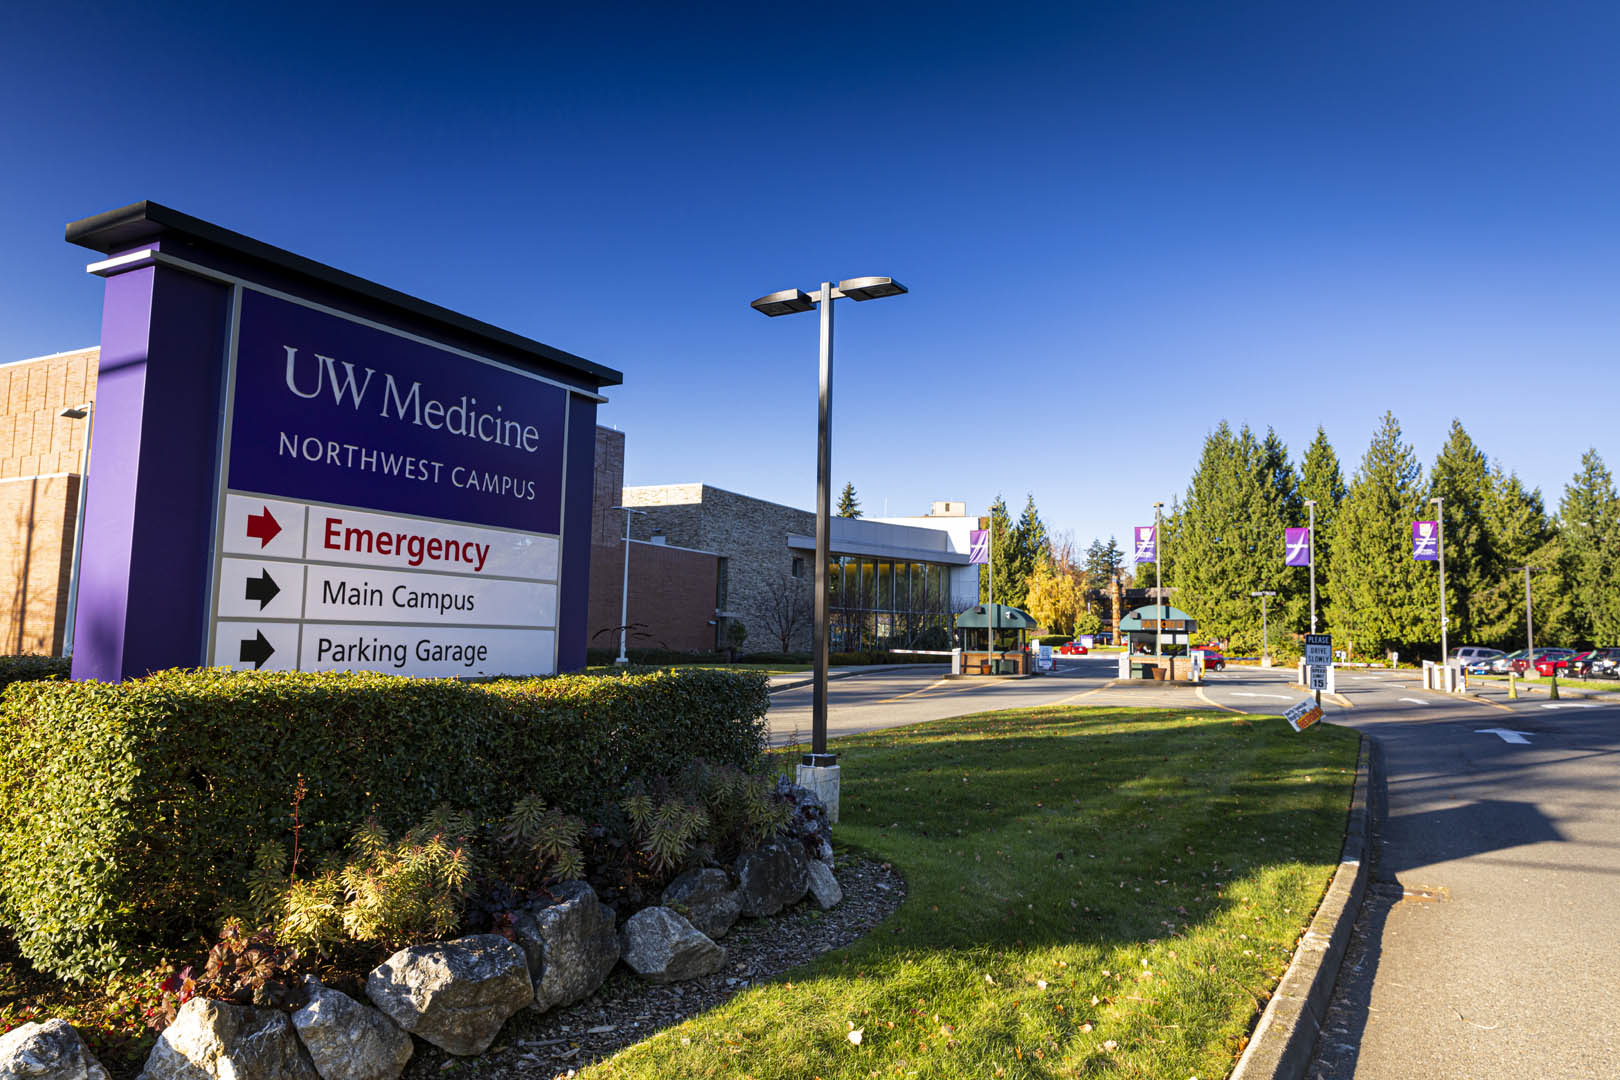 UWMC Northwest rebranded Campus entrance sign on a sunny day.